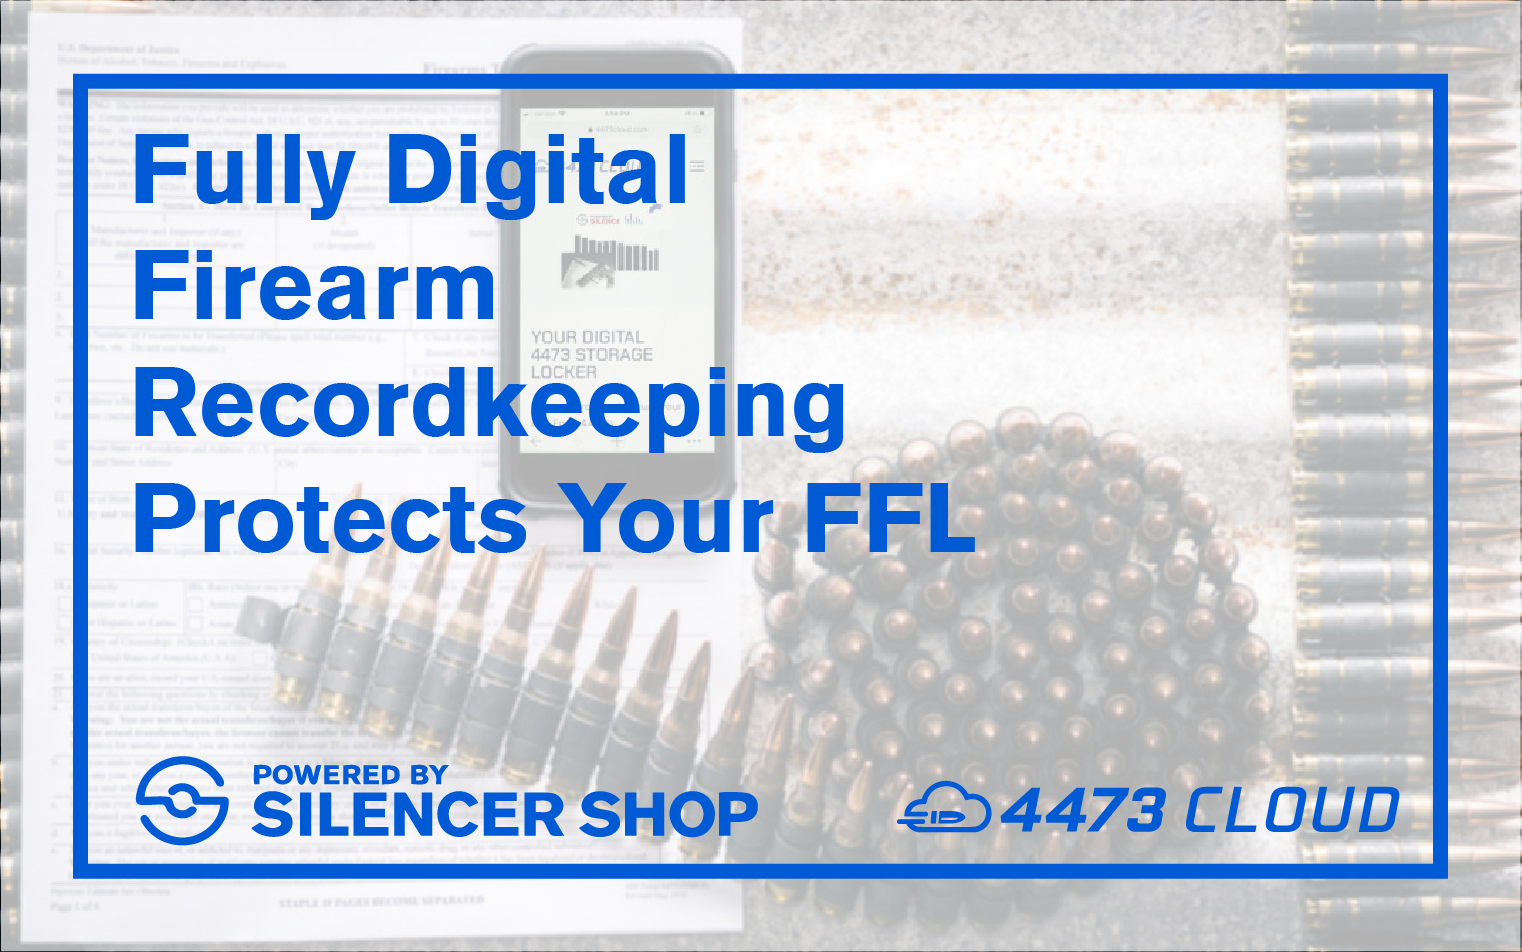 Fully Digital Firearm Recordkeeping Protects your FFL